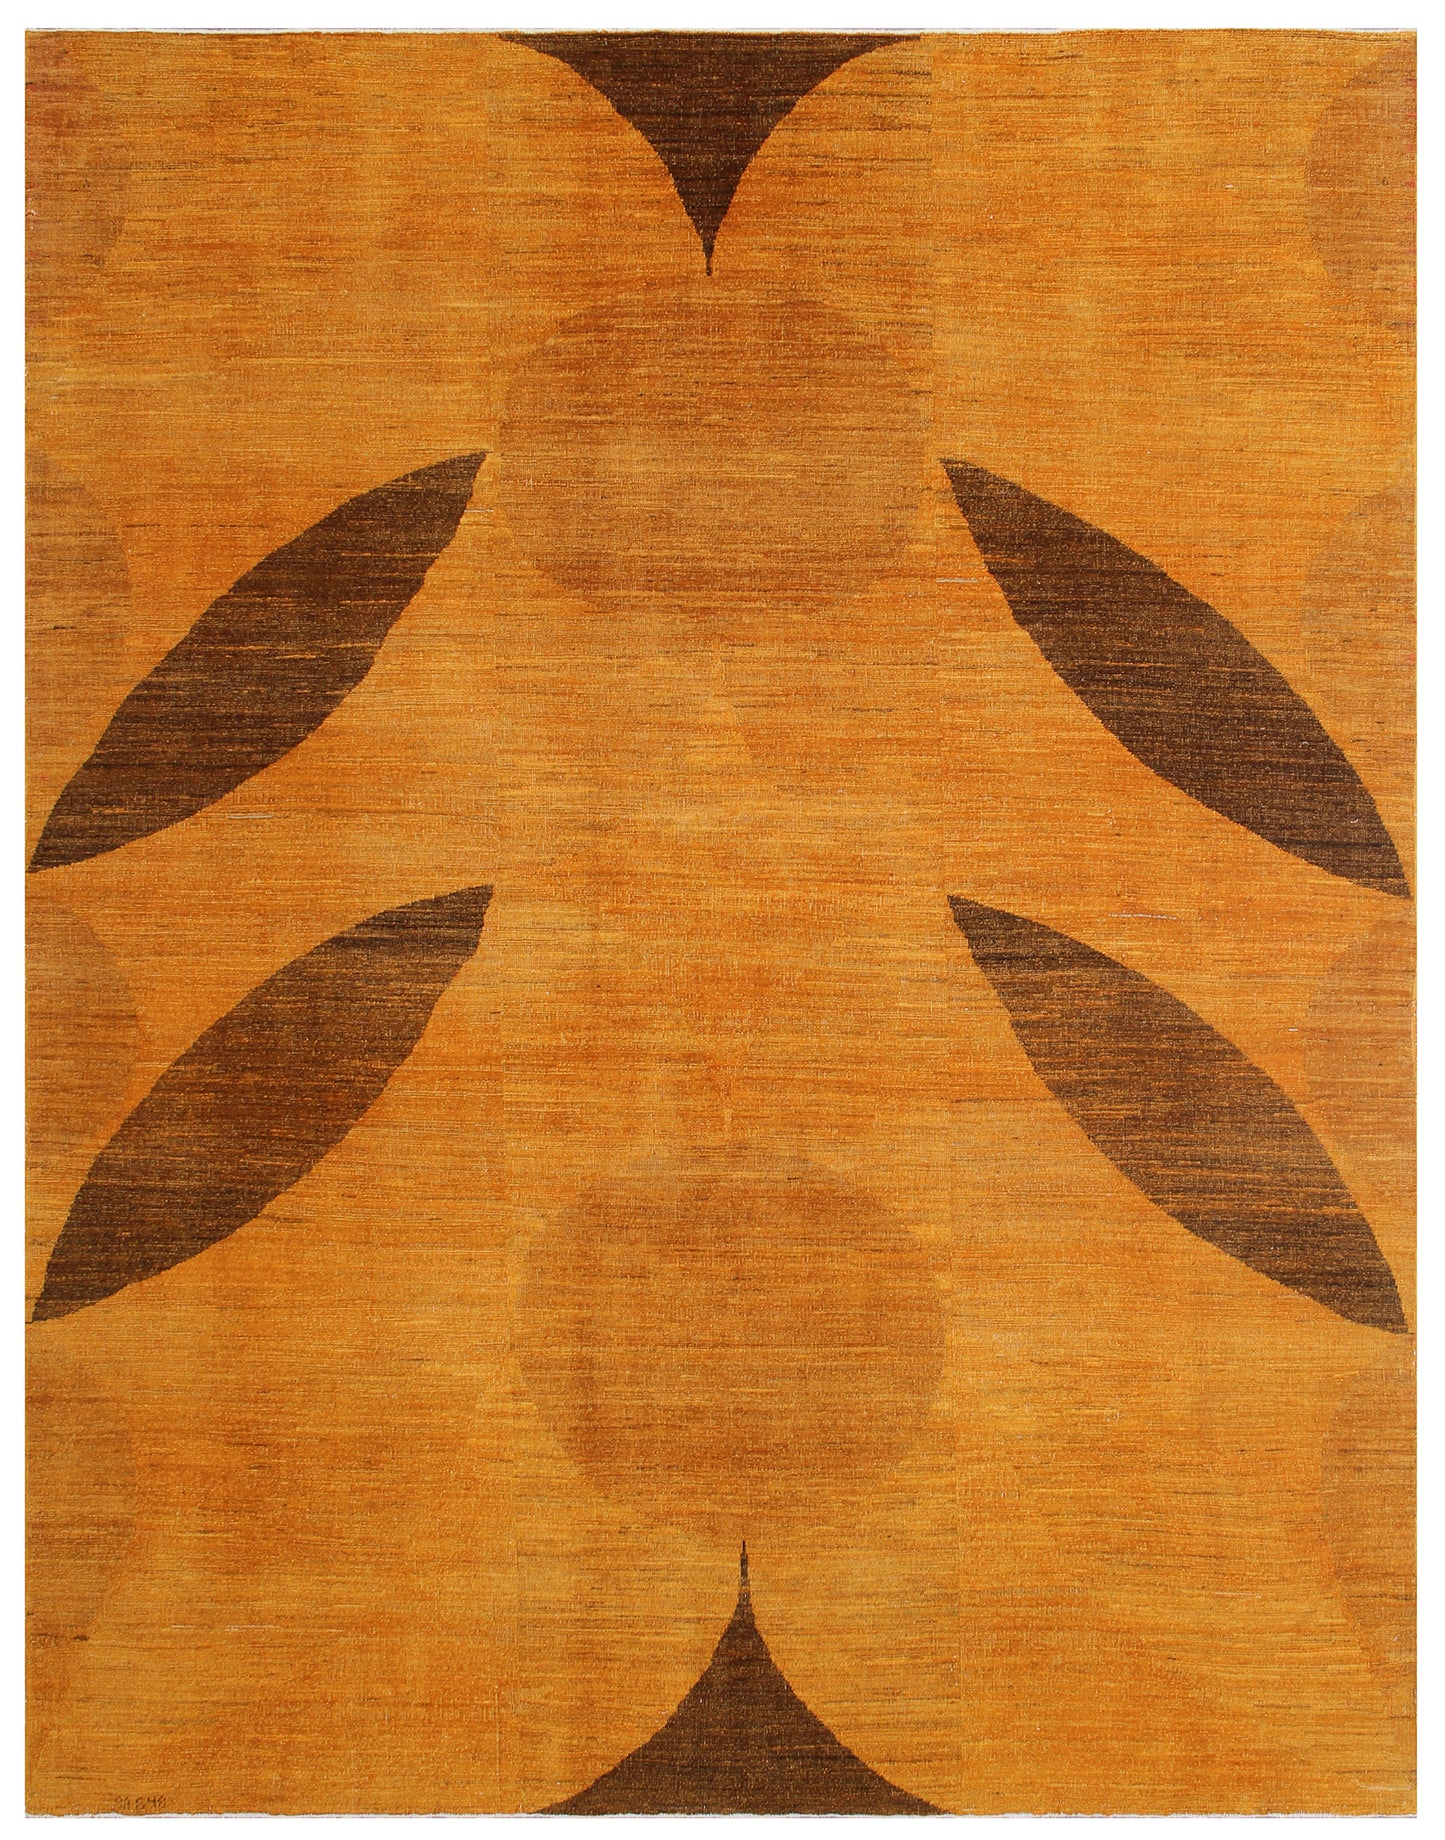 6'x8' Orange and Brown Contemporary Ariana Overdyed Rug